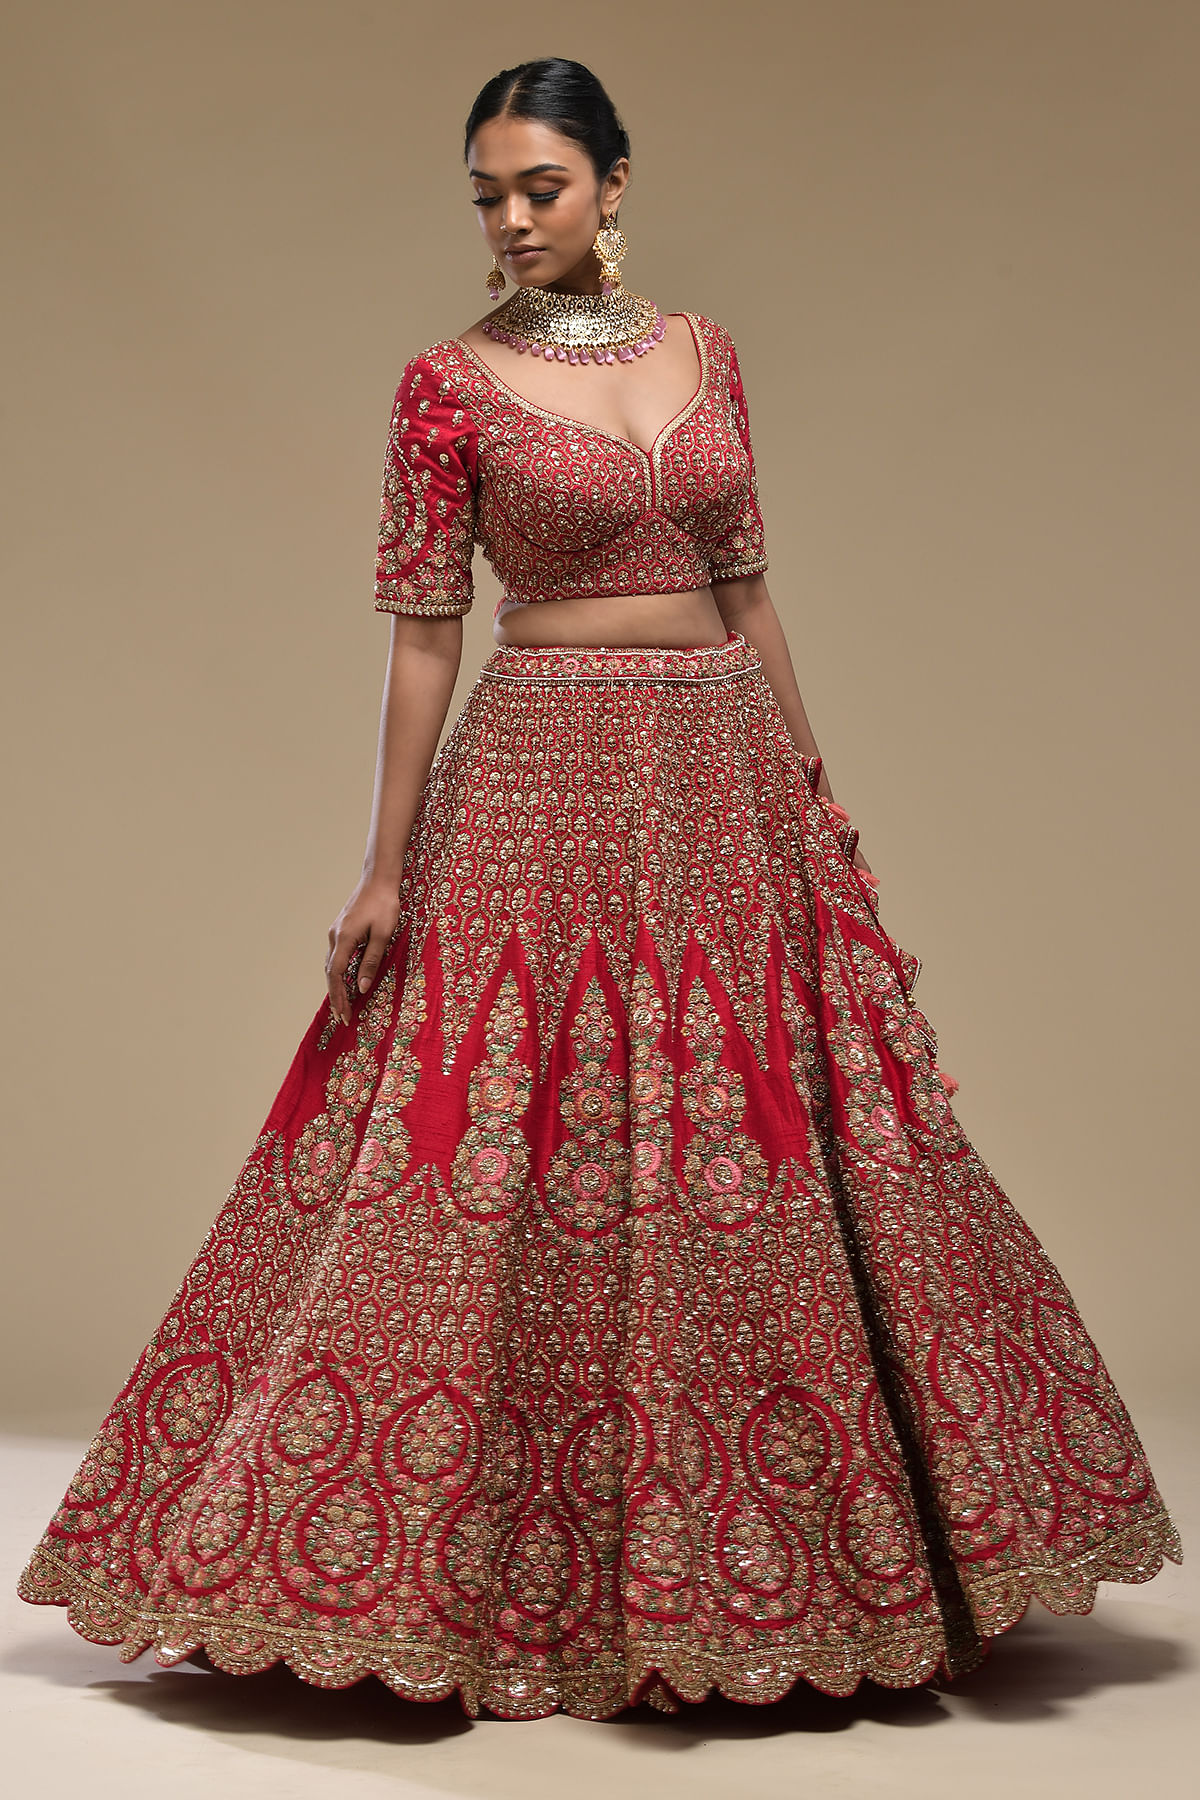 8 Trendy Colour Combinations for Indian Weddings — The Tamarind Tree